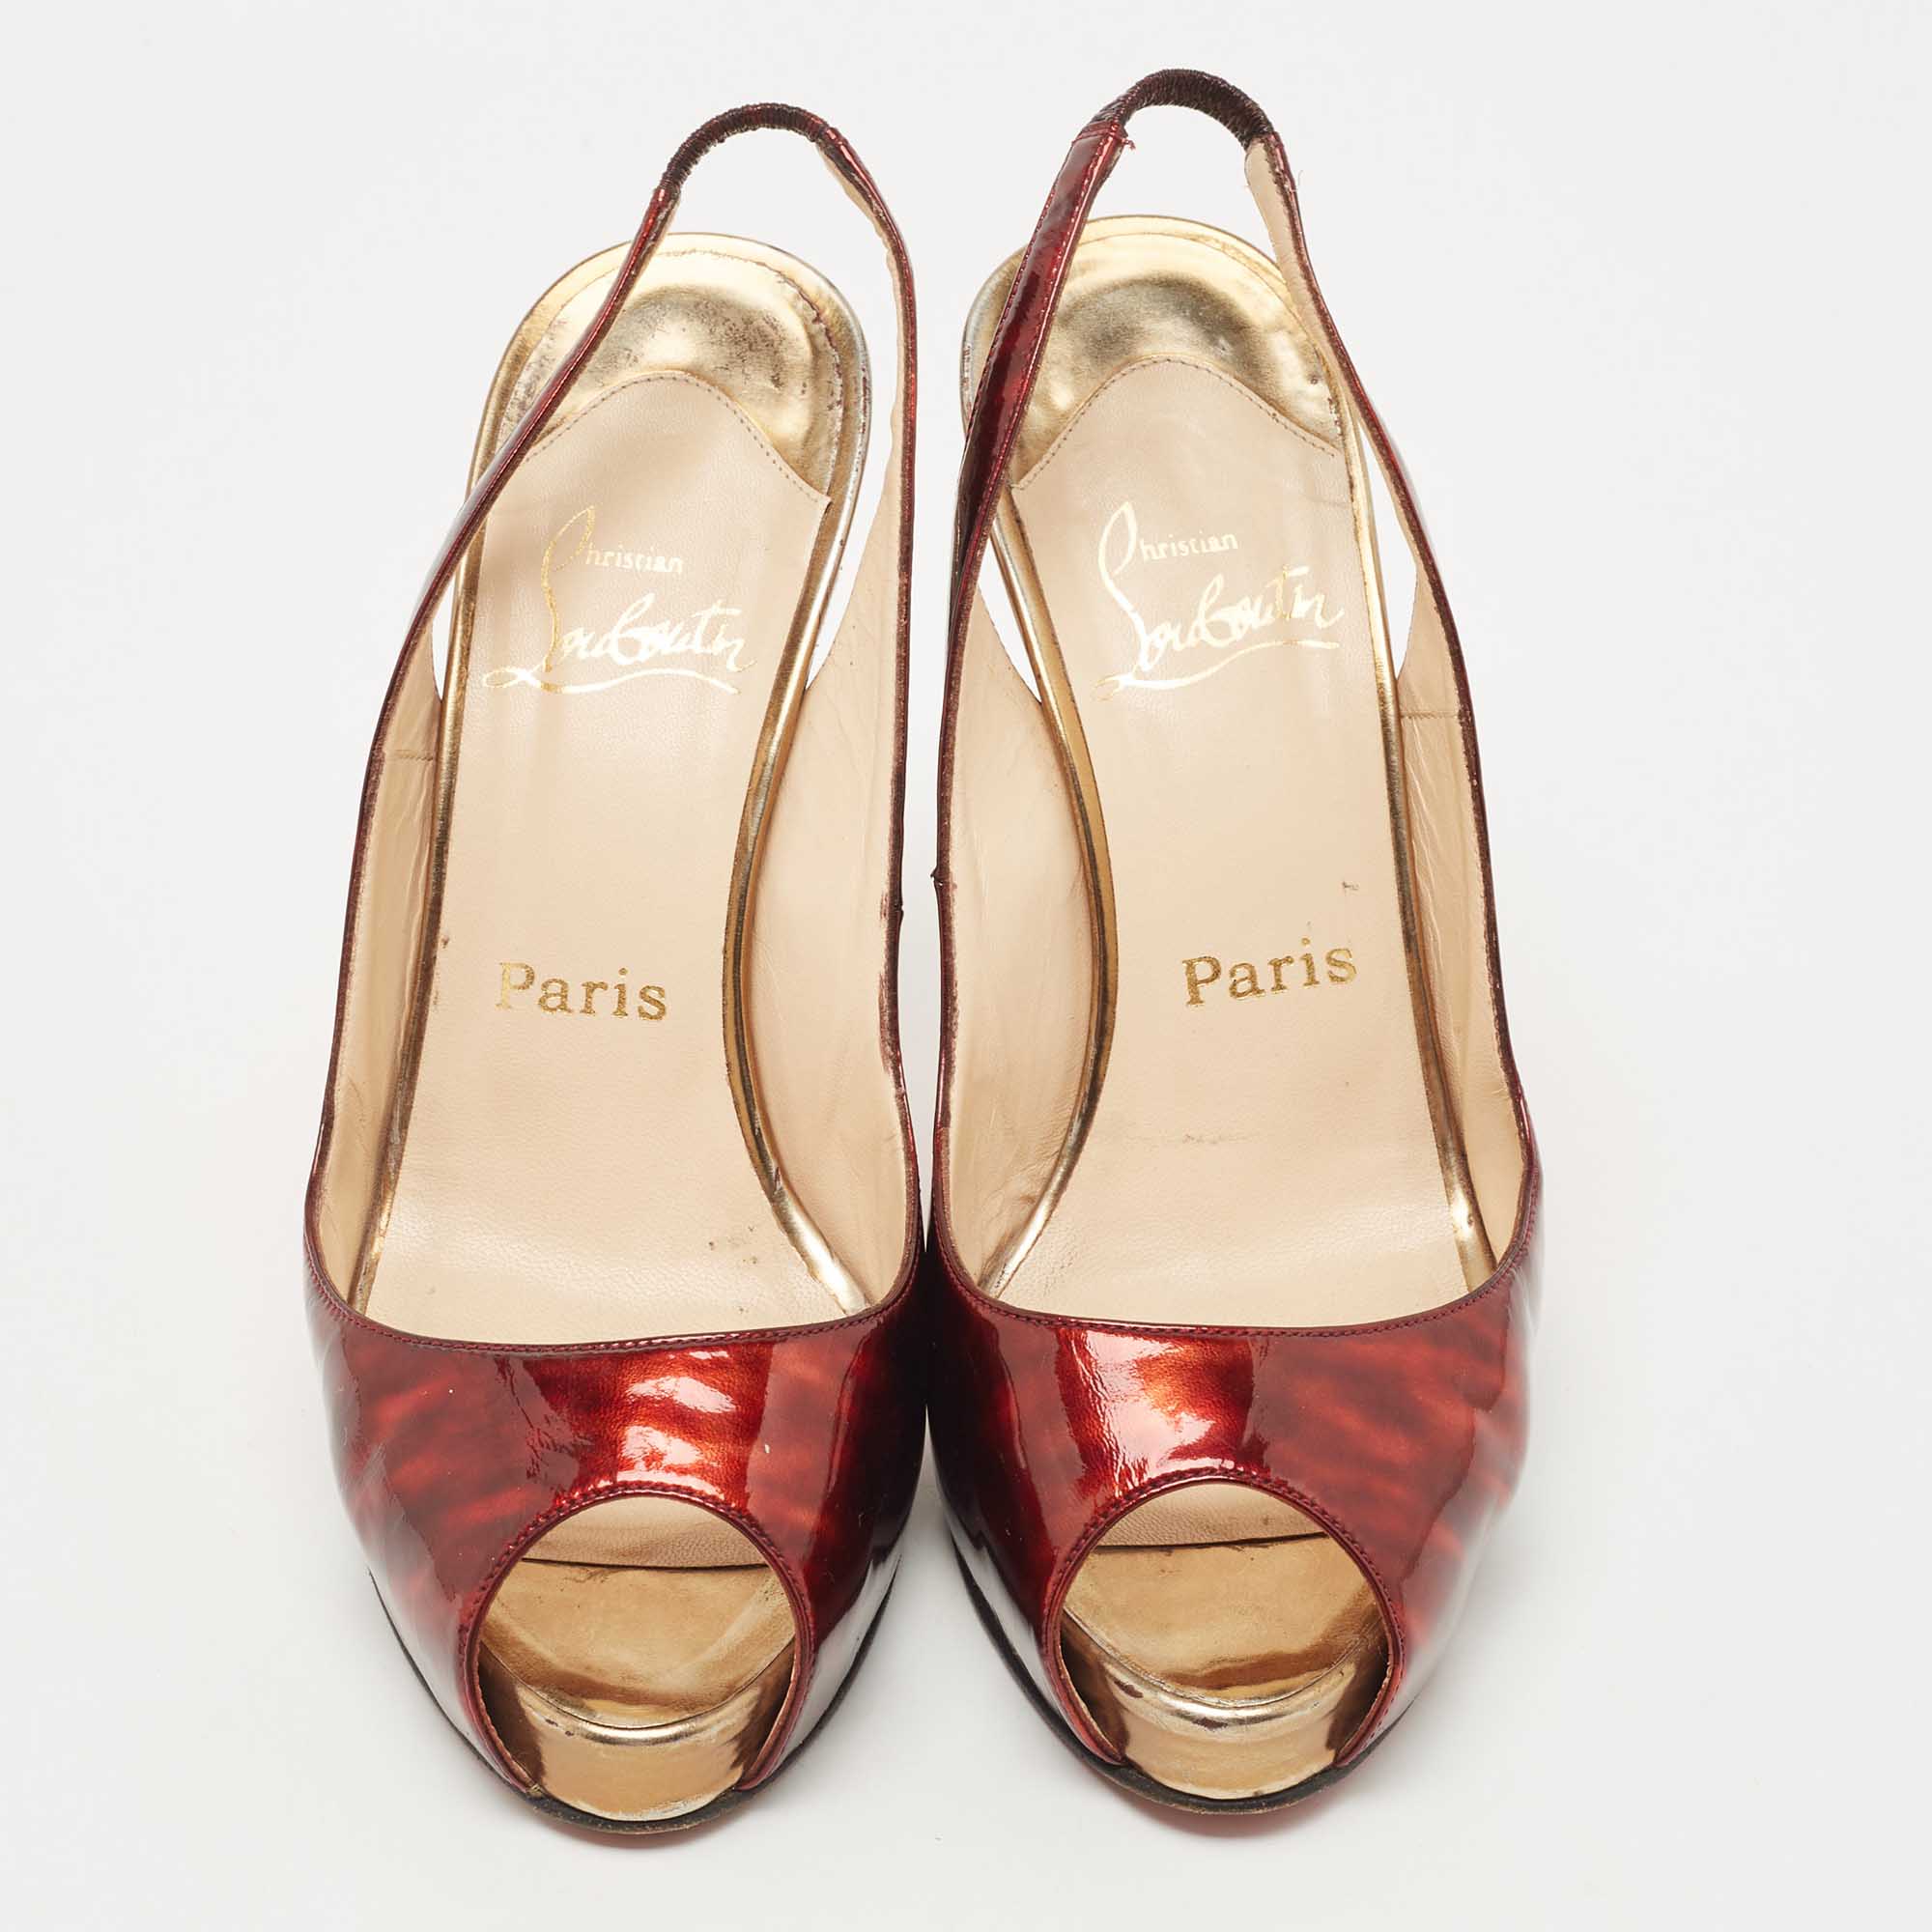 Christian Louboutin Two Tone Patent Leather No Prive Slingback Pumps Size 38